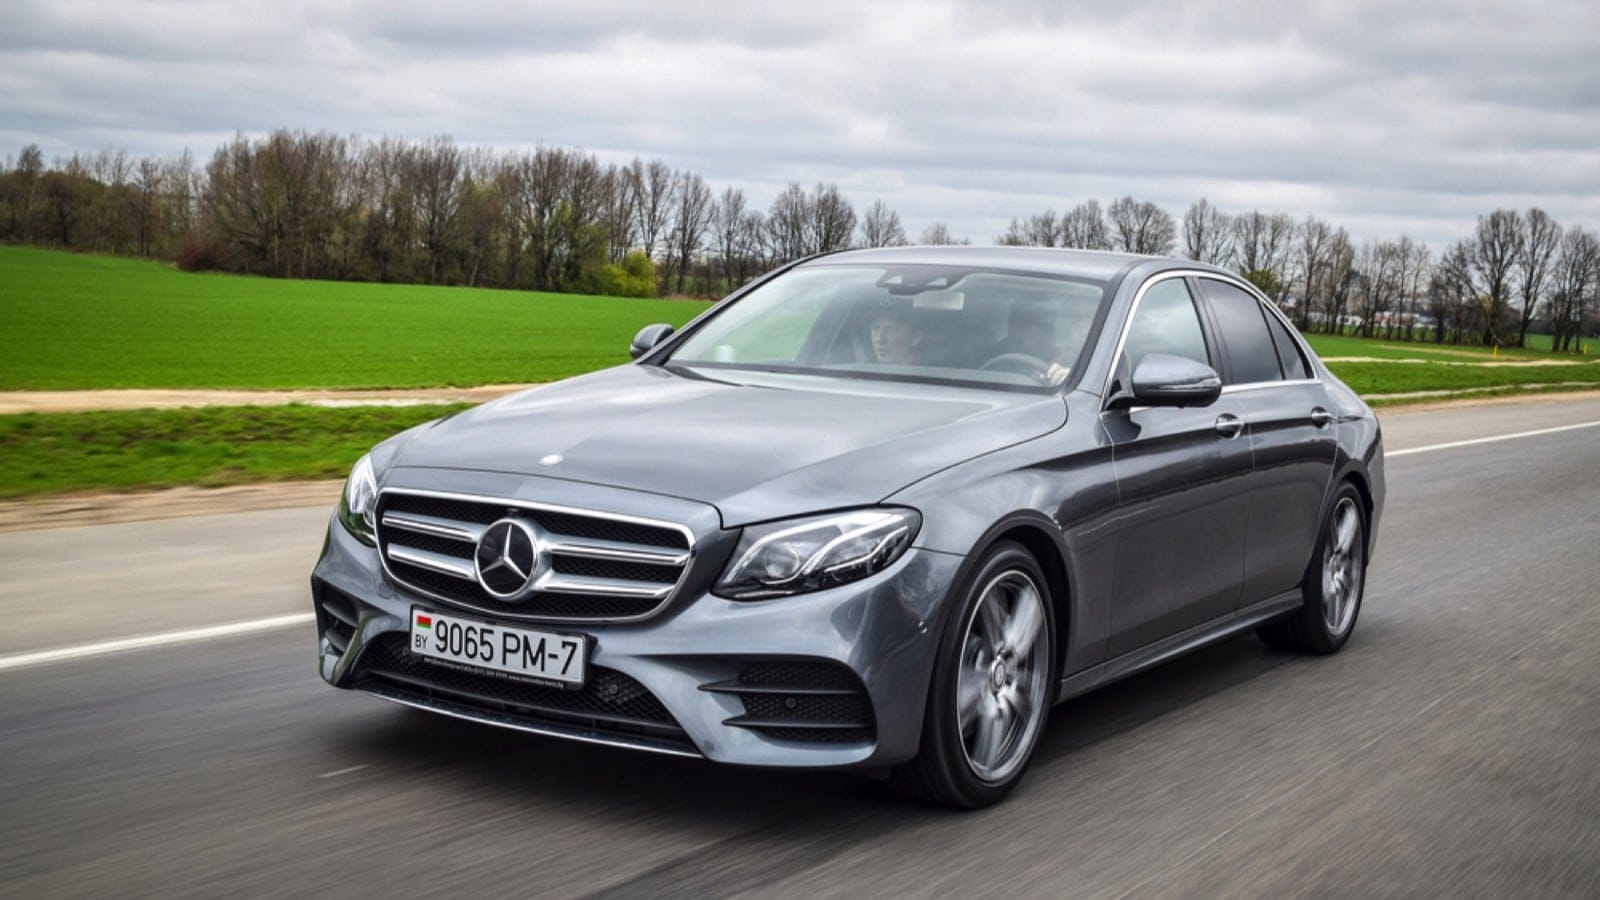 MINSK, BELARUS - APRIL 21, 2016: 2016 model year Mercedes-Benz E220d. The new E-Class is engineered to deliver more comfort, more efficiency and a more connected drive than ever before.